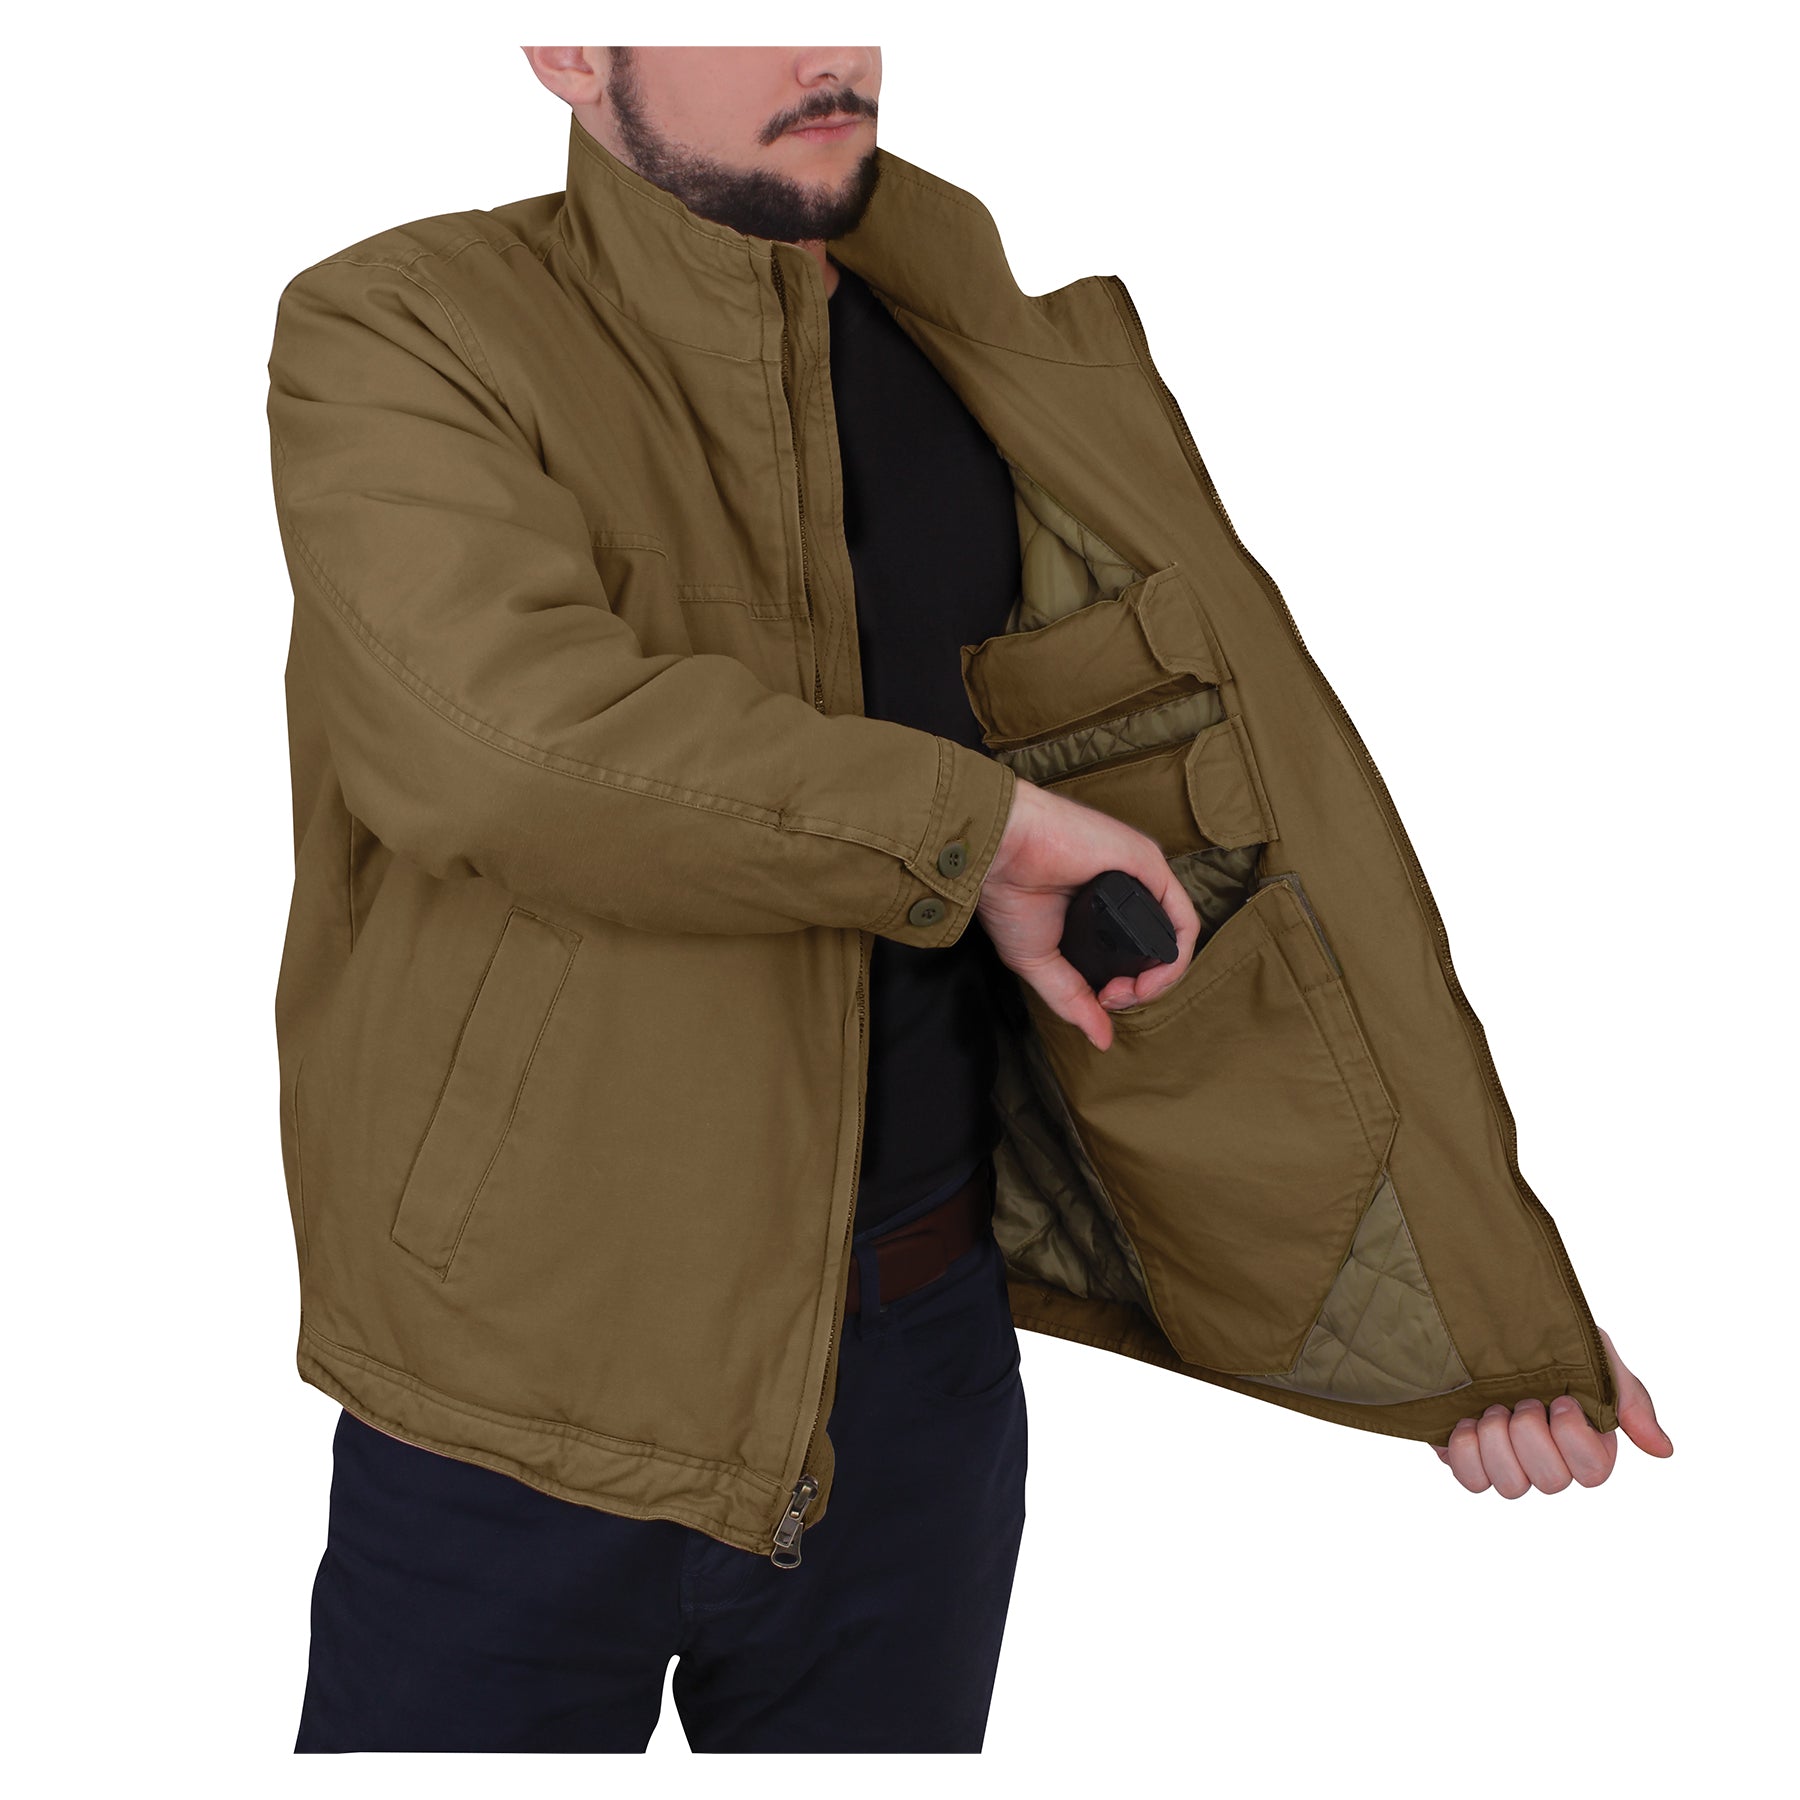 Milspec Concealed Carry 3 Season Jacket Concealed Carry Clothing MilTac Tactical Military Outdoor Gear Australia